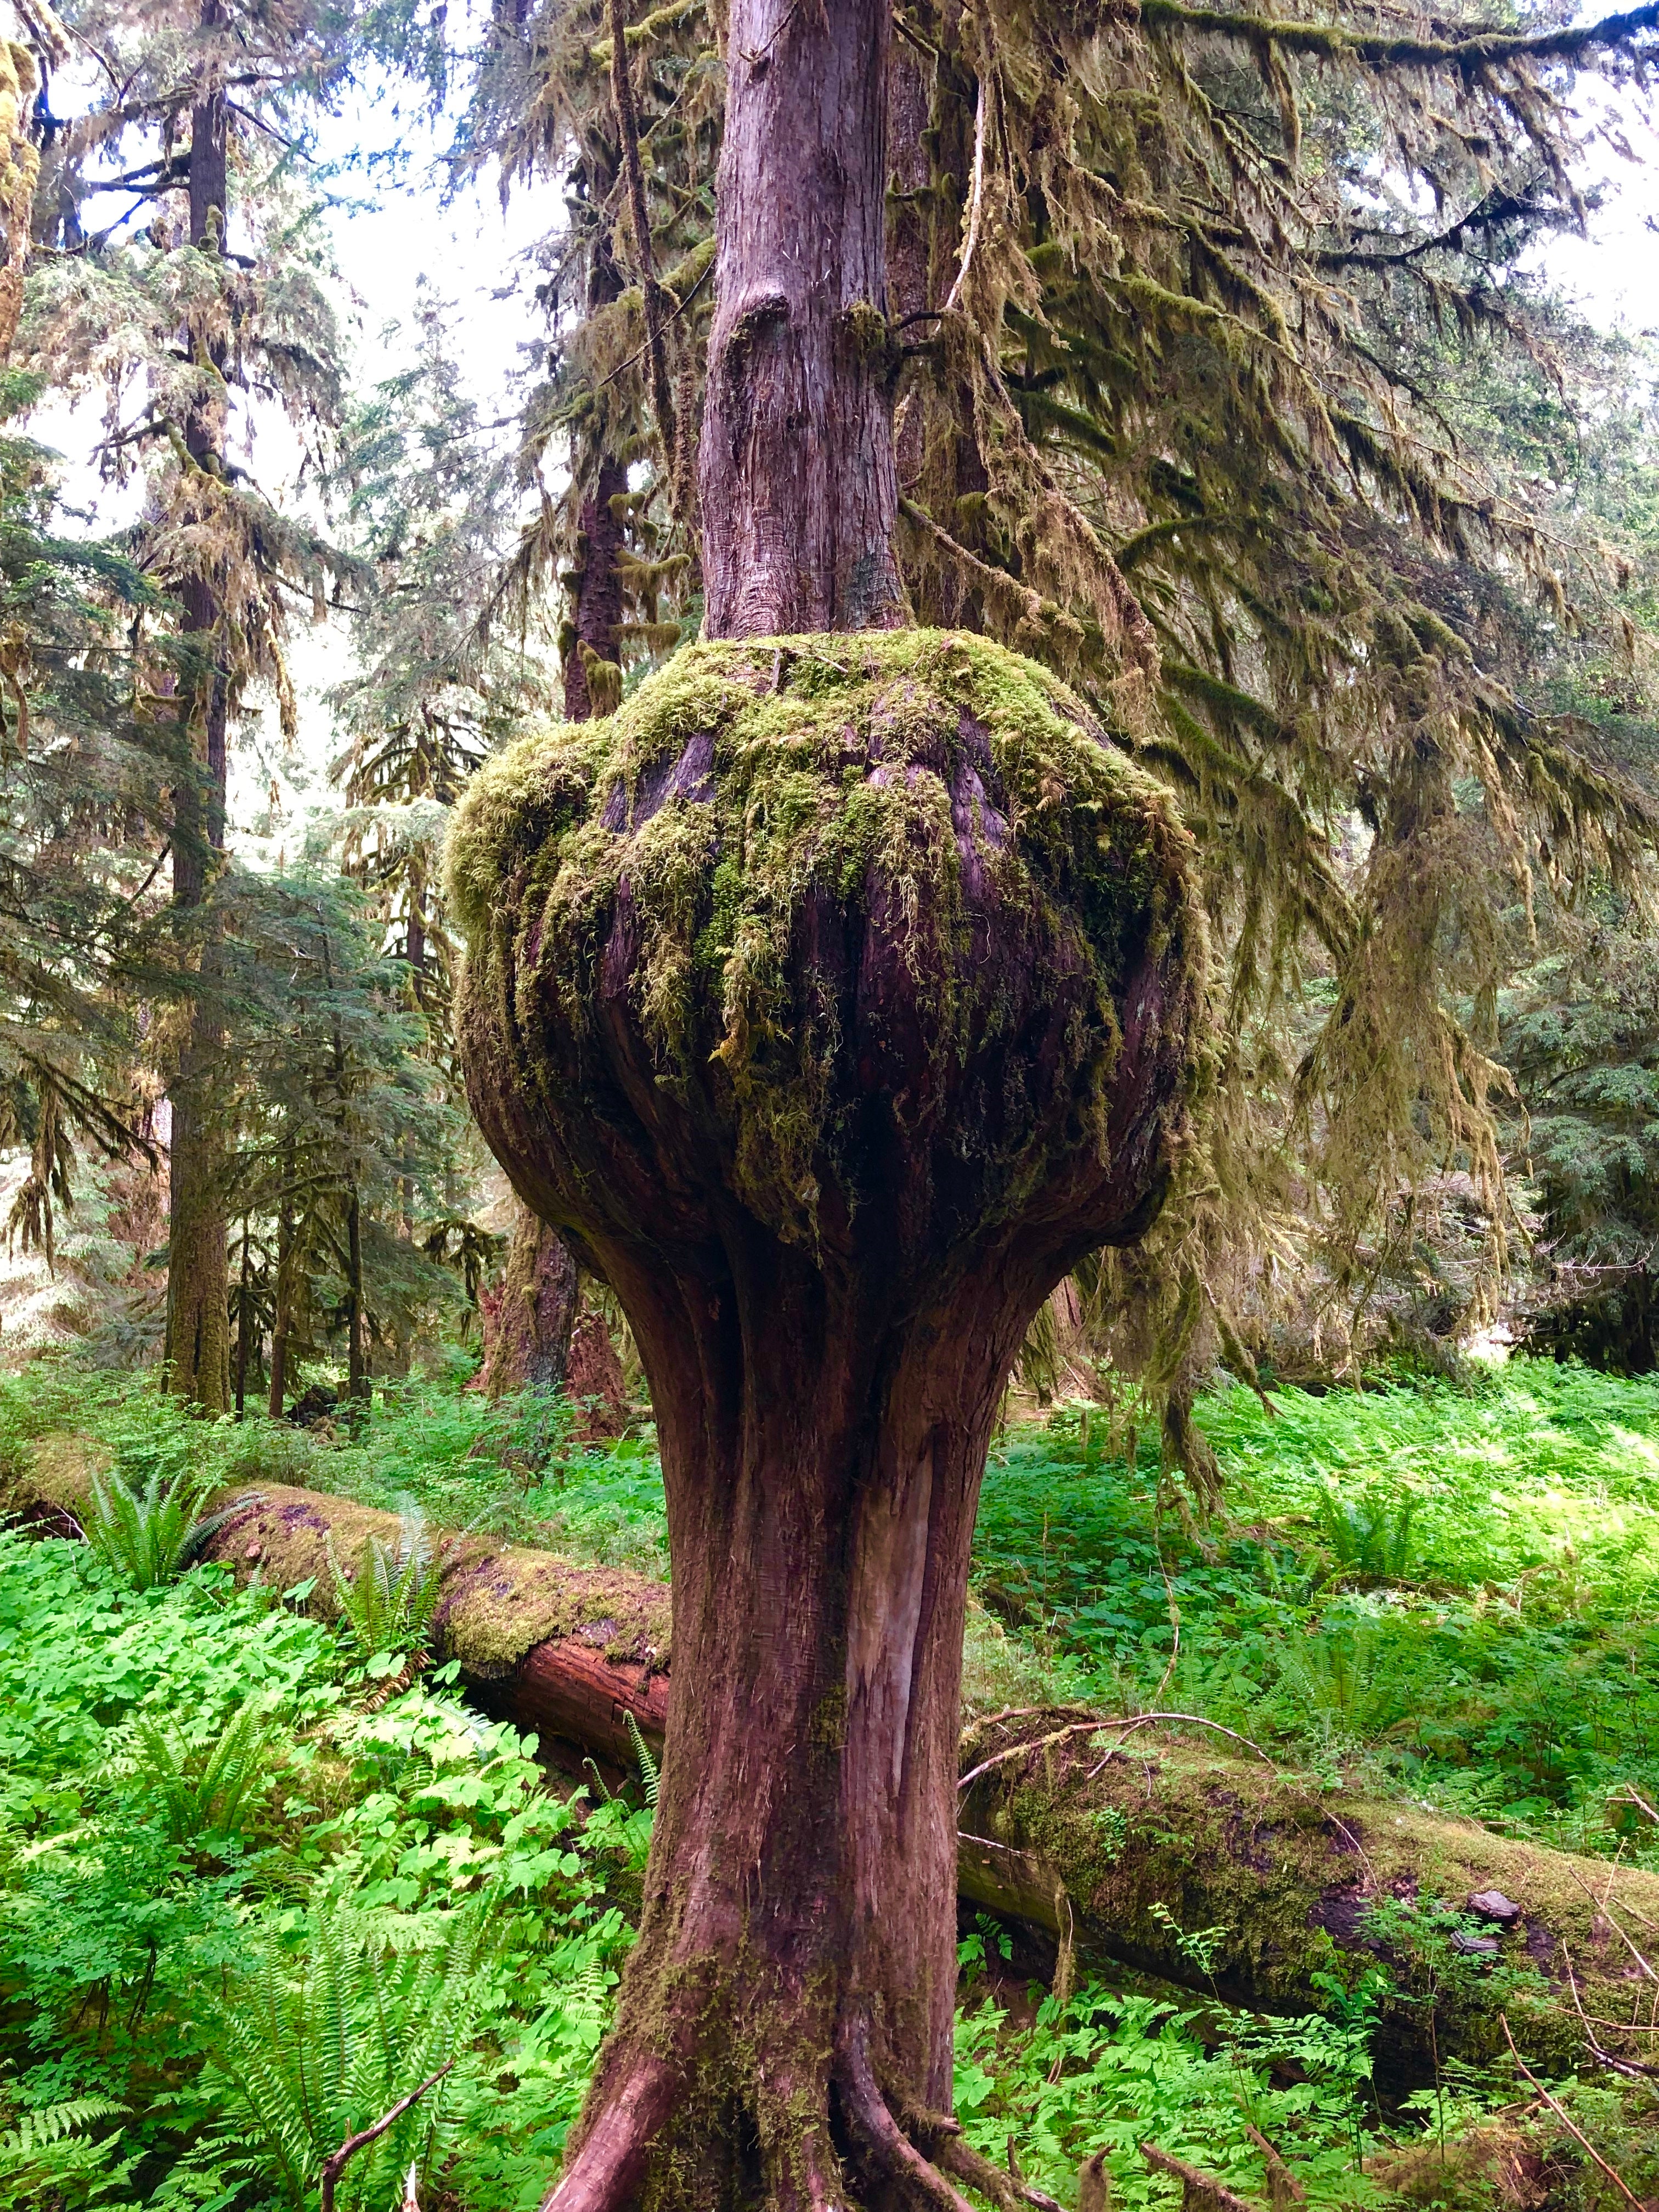 This tree wins the award for most unique